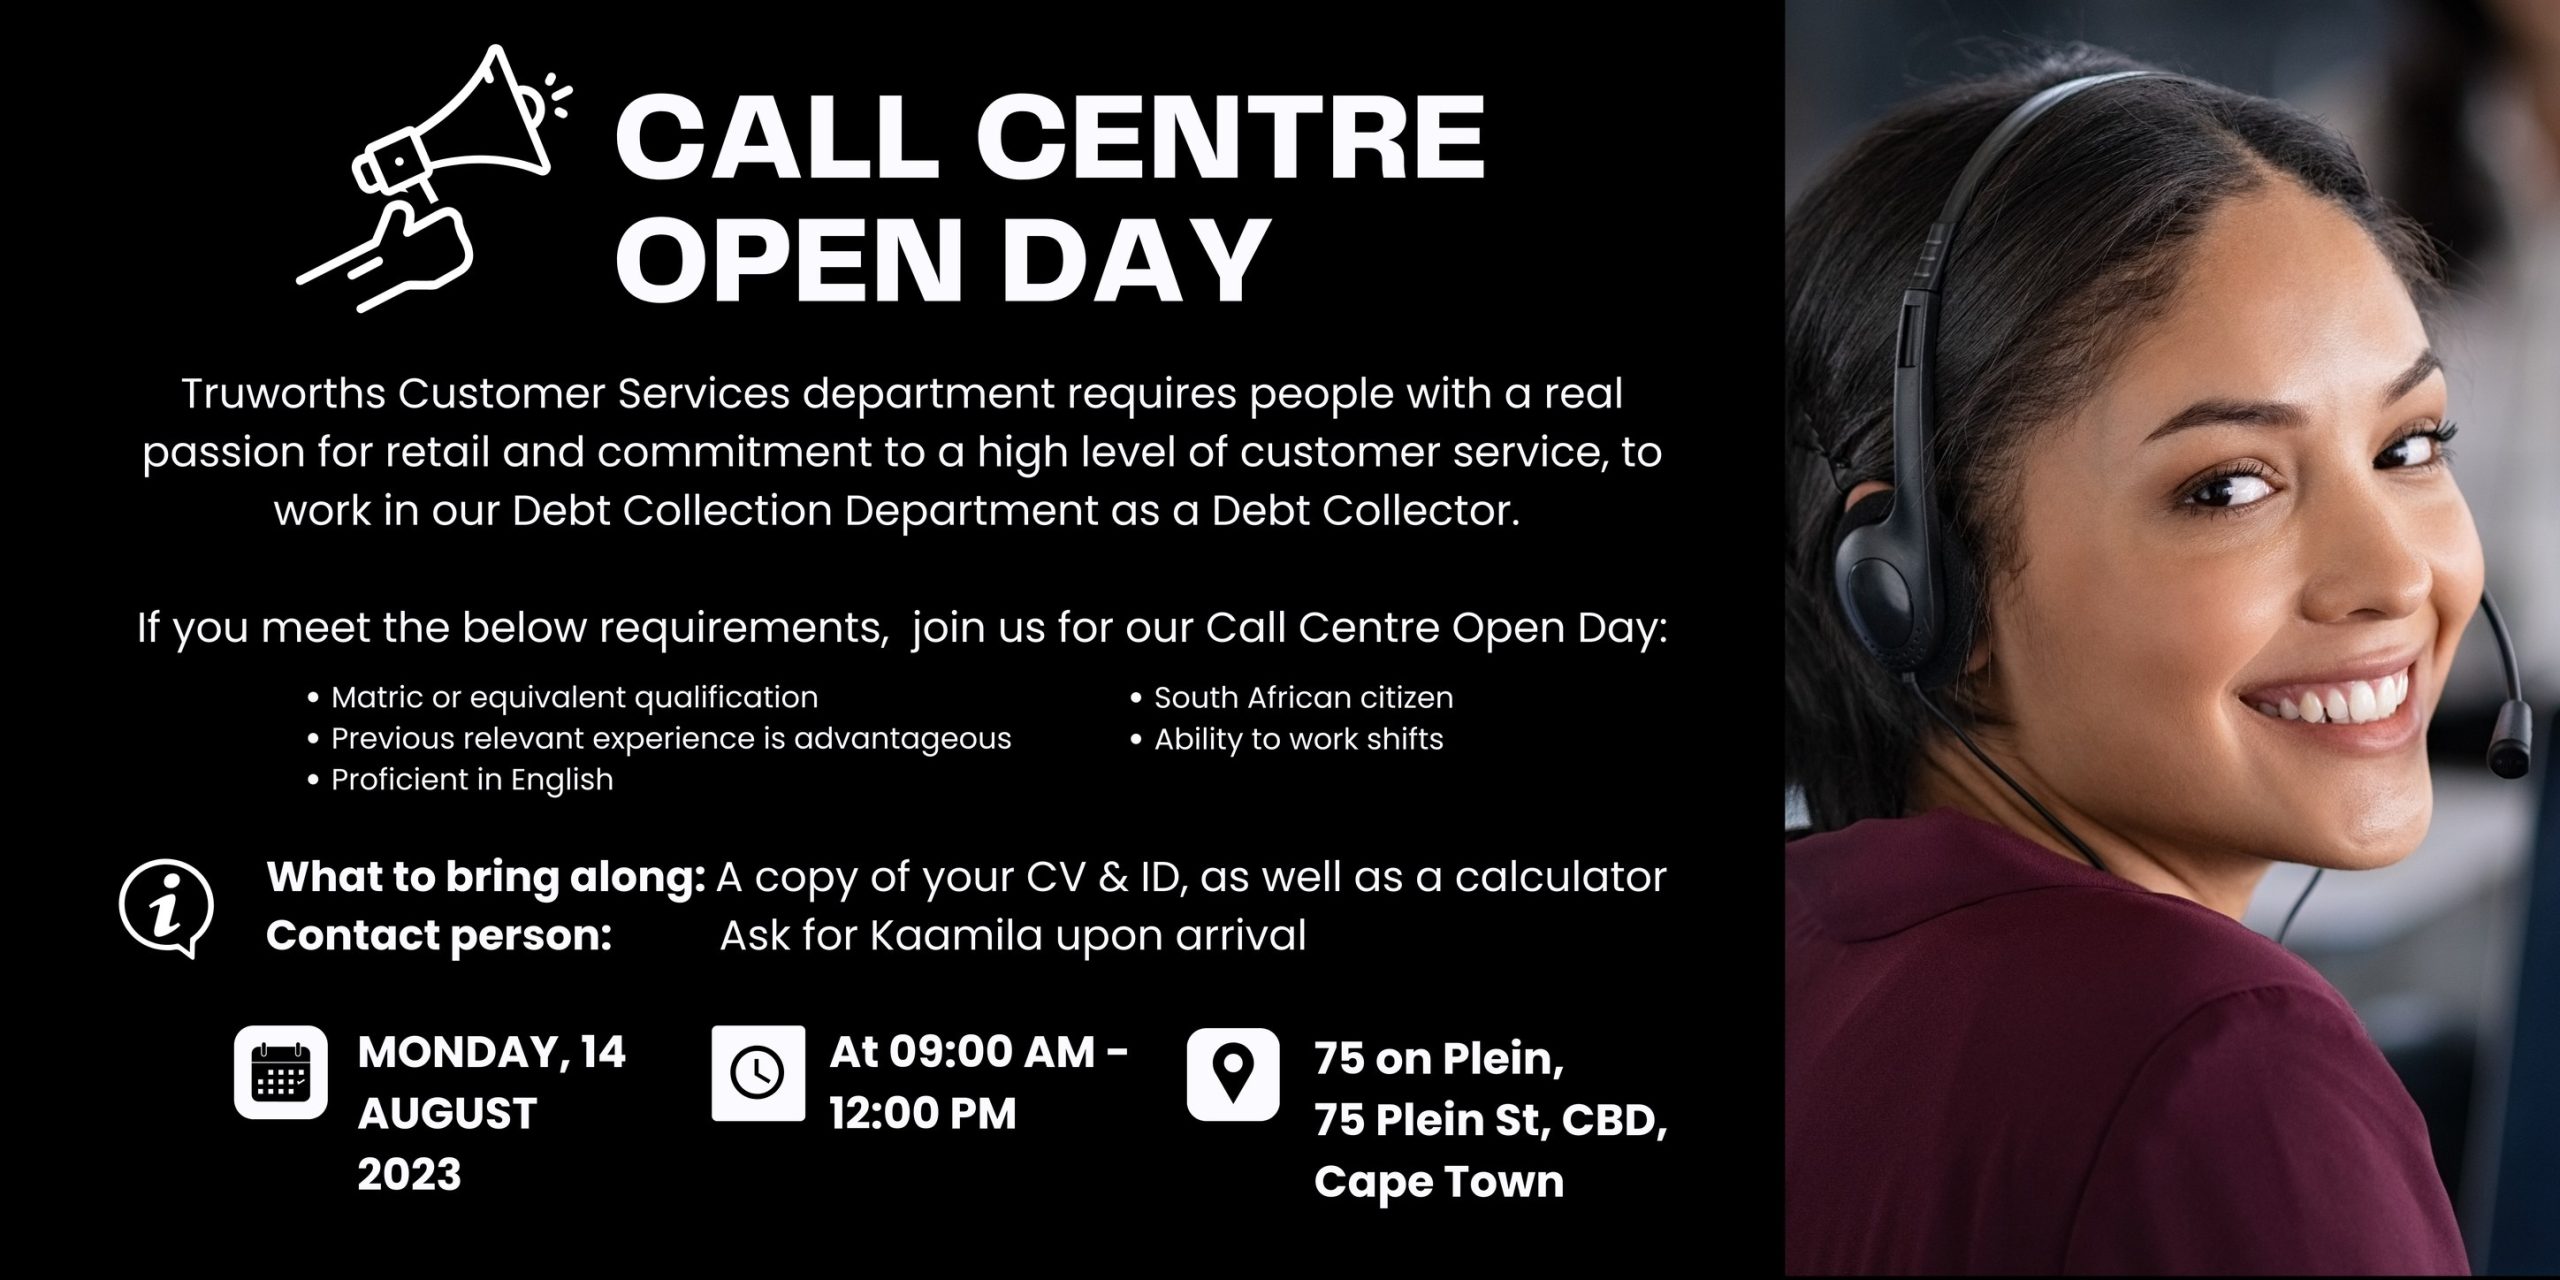 Join Truworths Call Centre Open Day